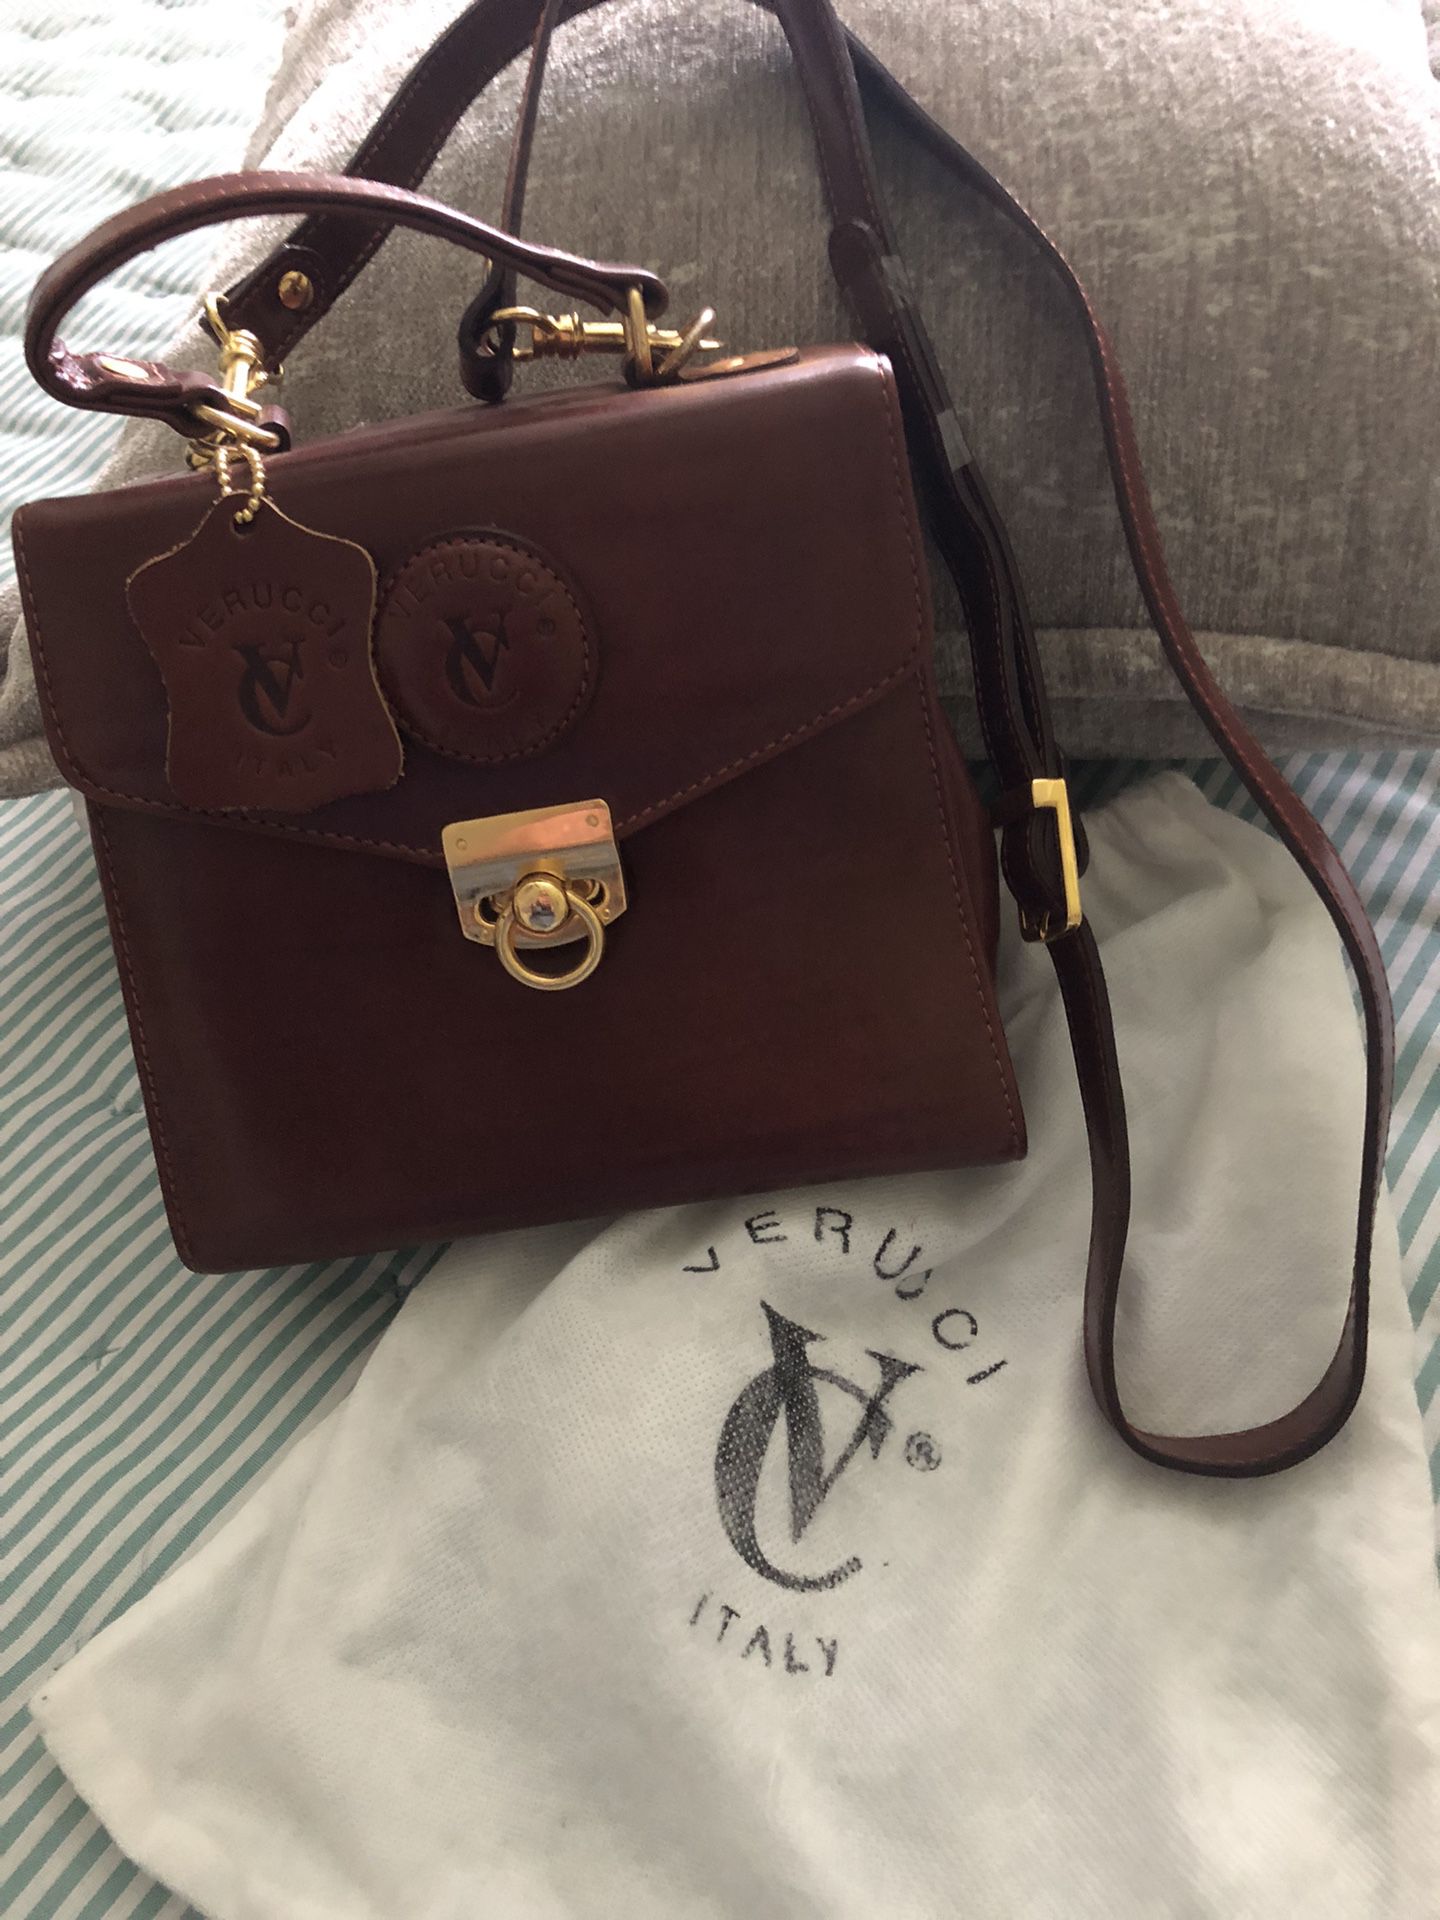 LV Crossbody Purse for Sale in Fort Myers, FL - OfferUp